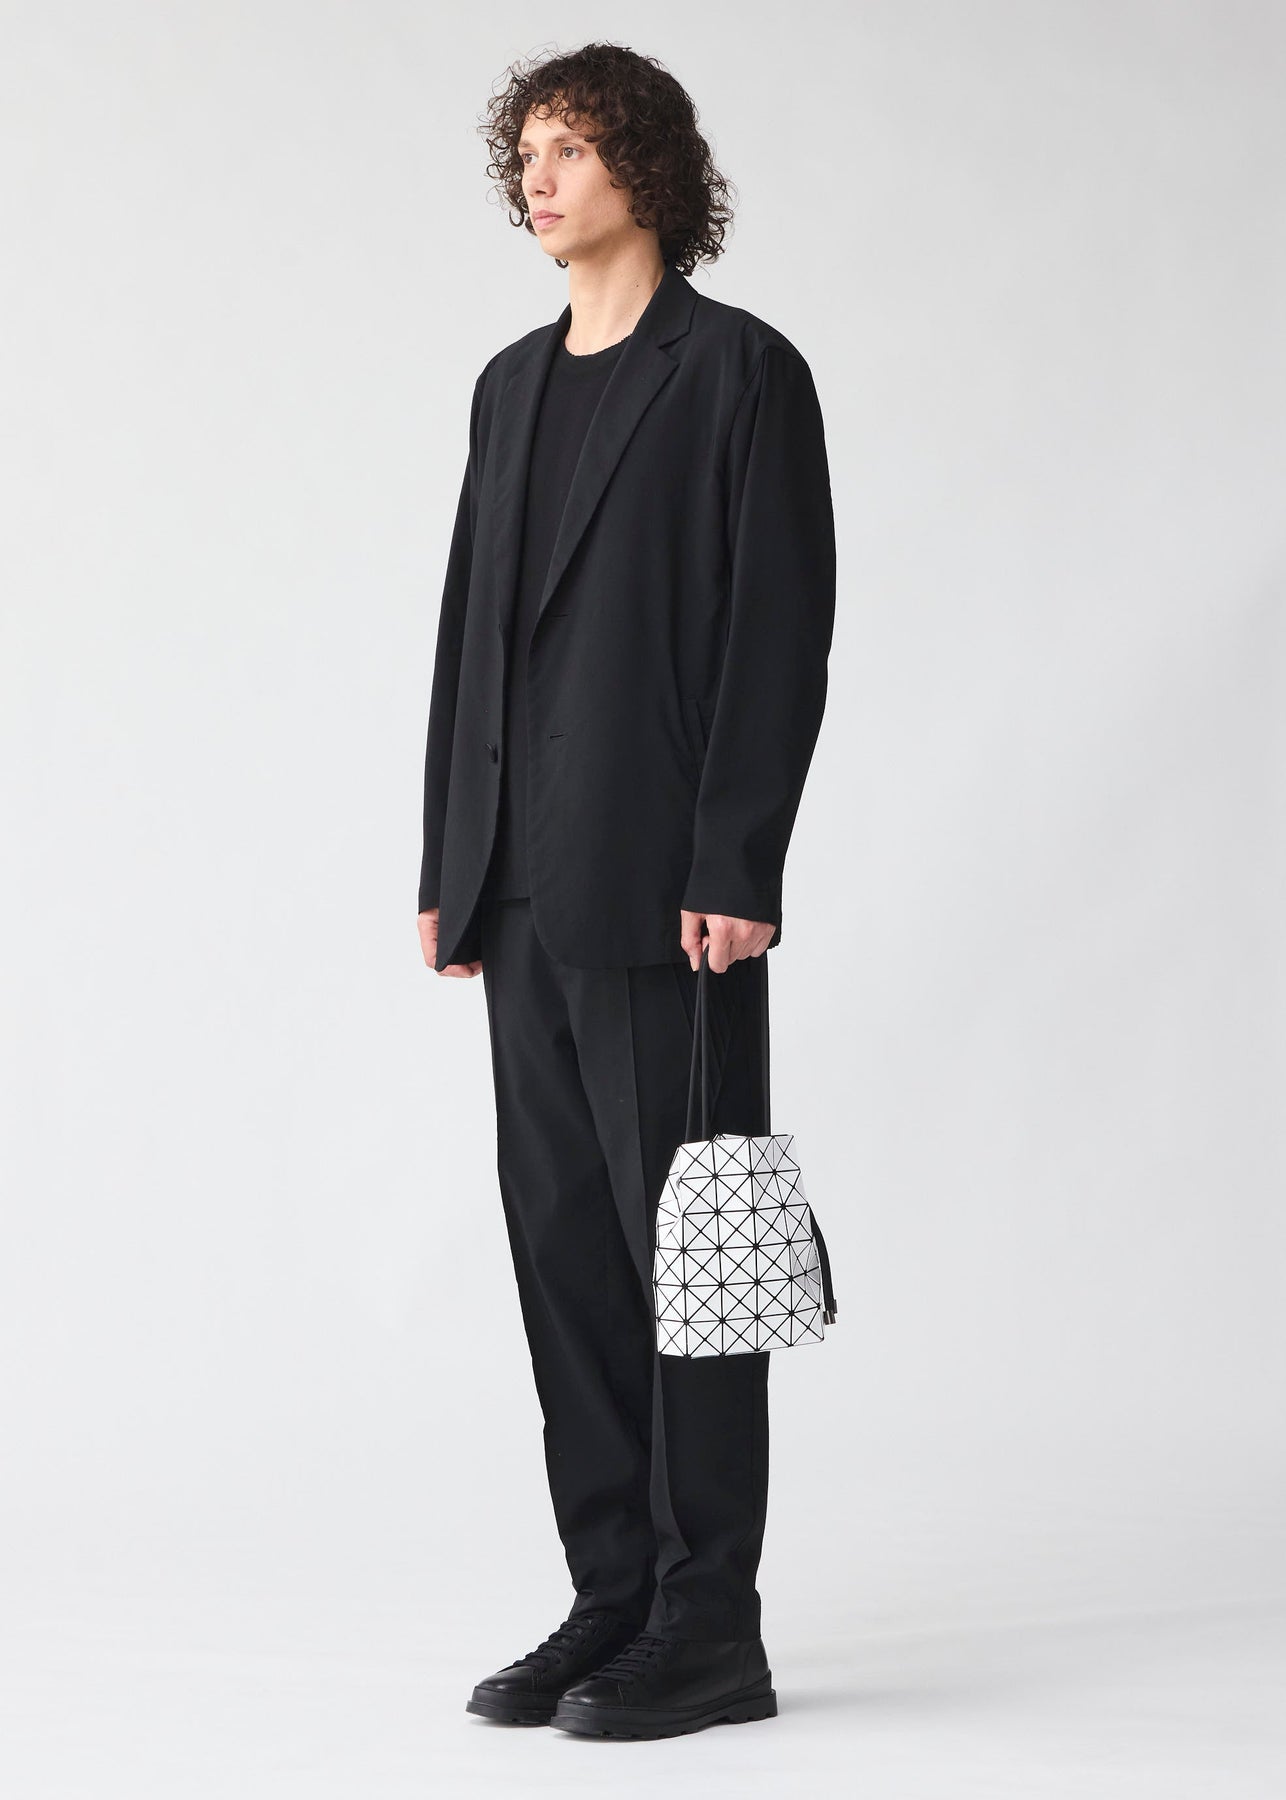 WRING SHOULDER BAG | The official ISSEY MIYAKE ONLINE STORE 